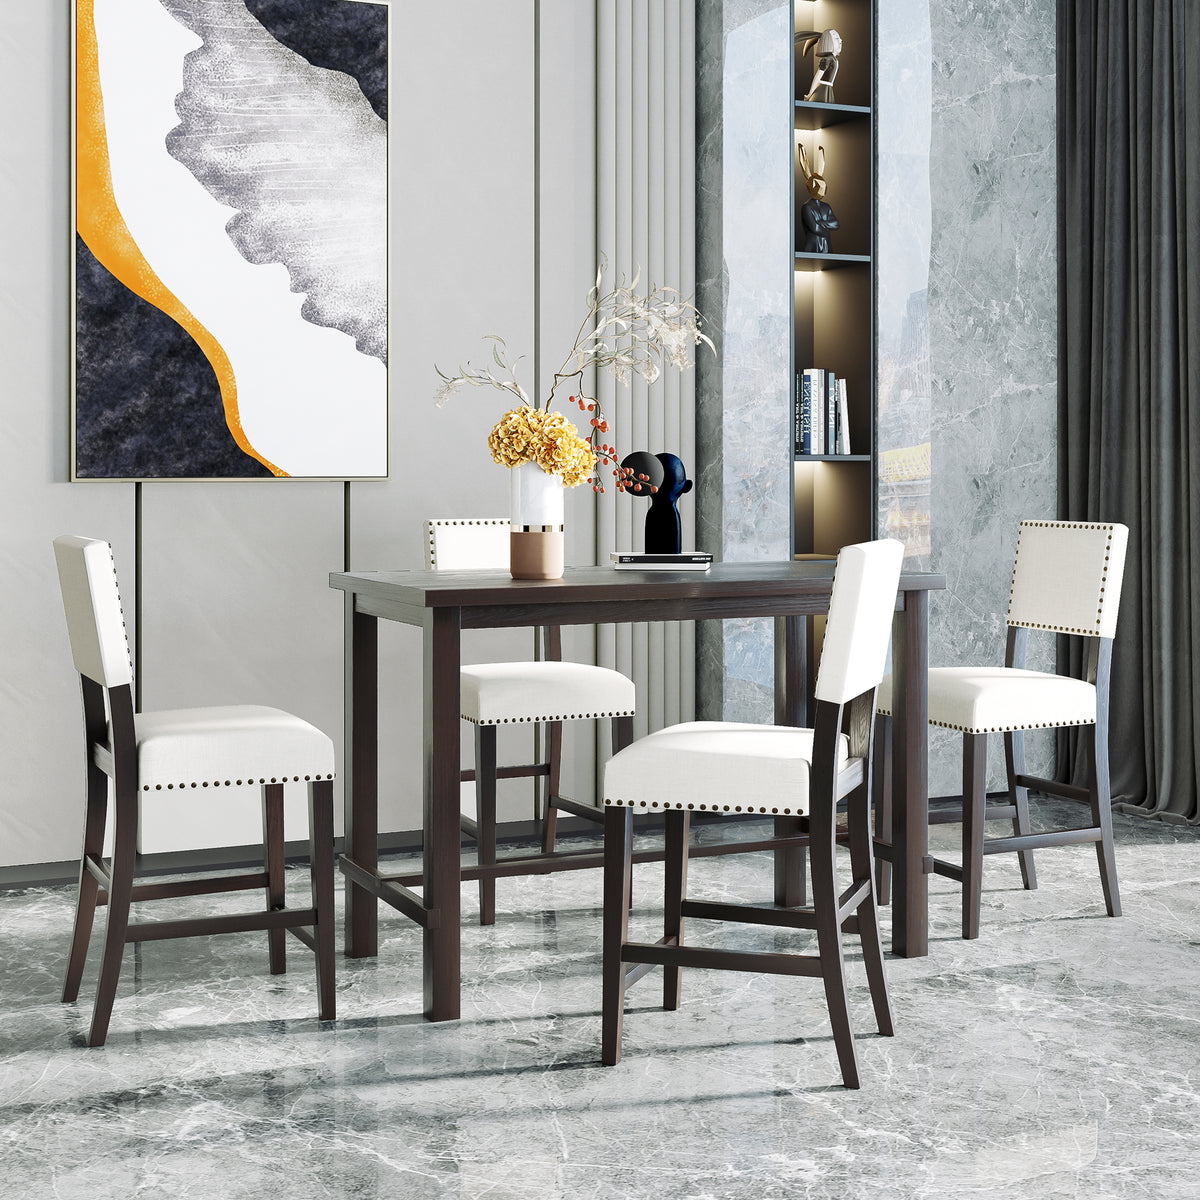 Bellemave® 5-Piece Counter Height Dining Set, Classic Elegant Table and 4 Chairs Bellemave®